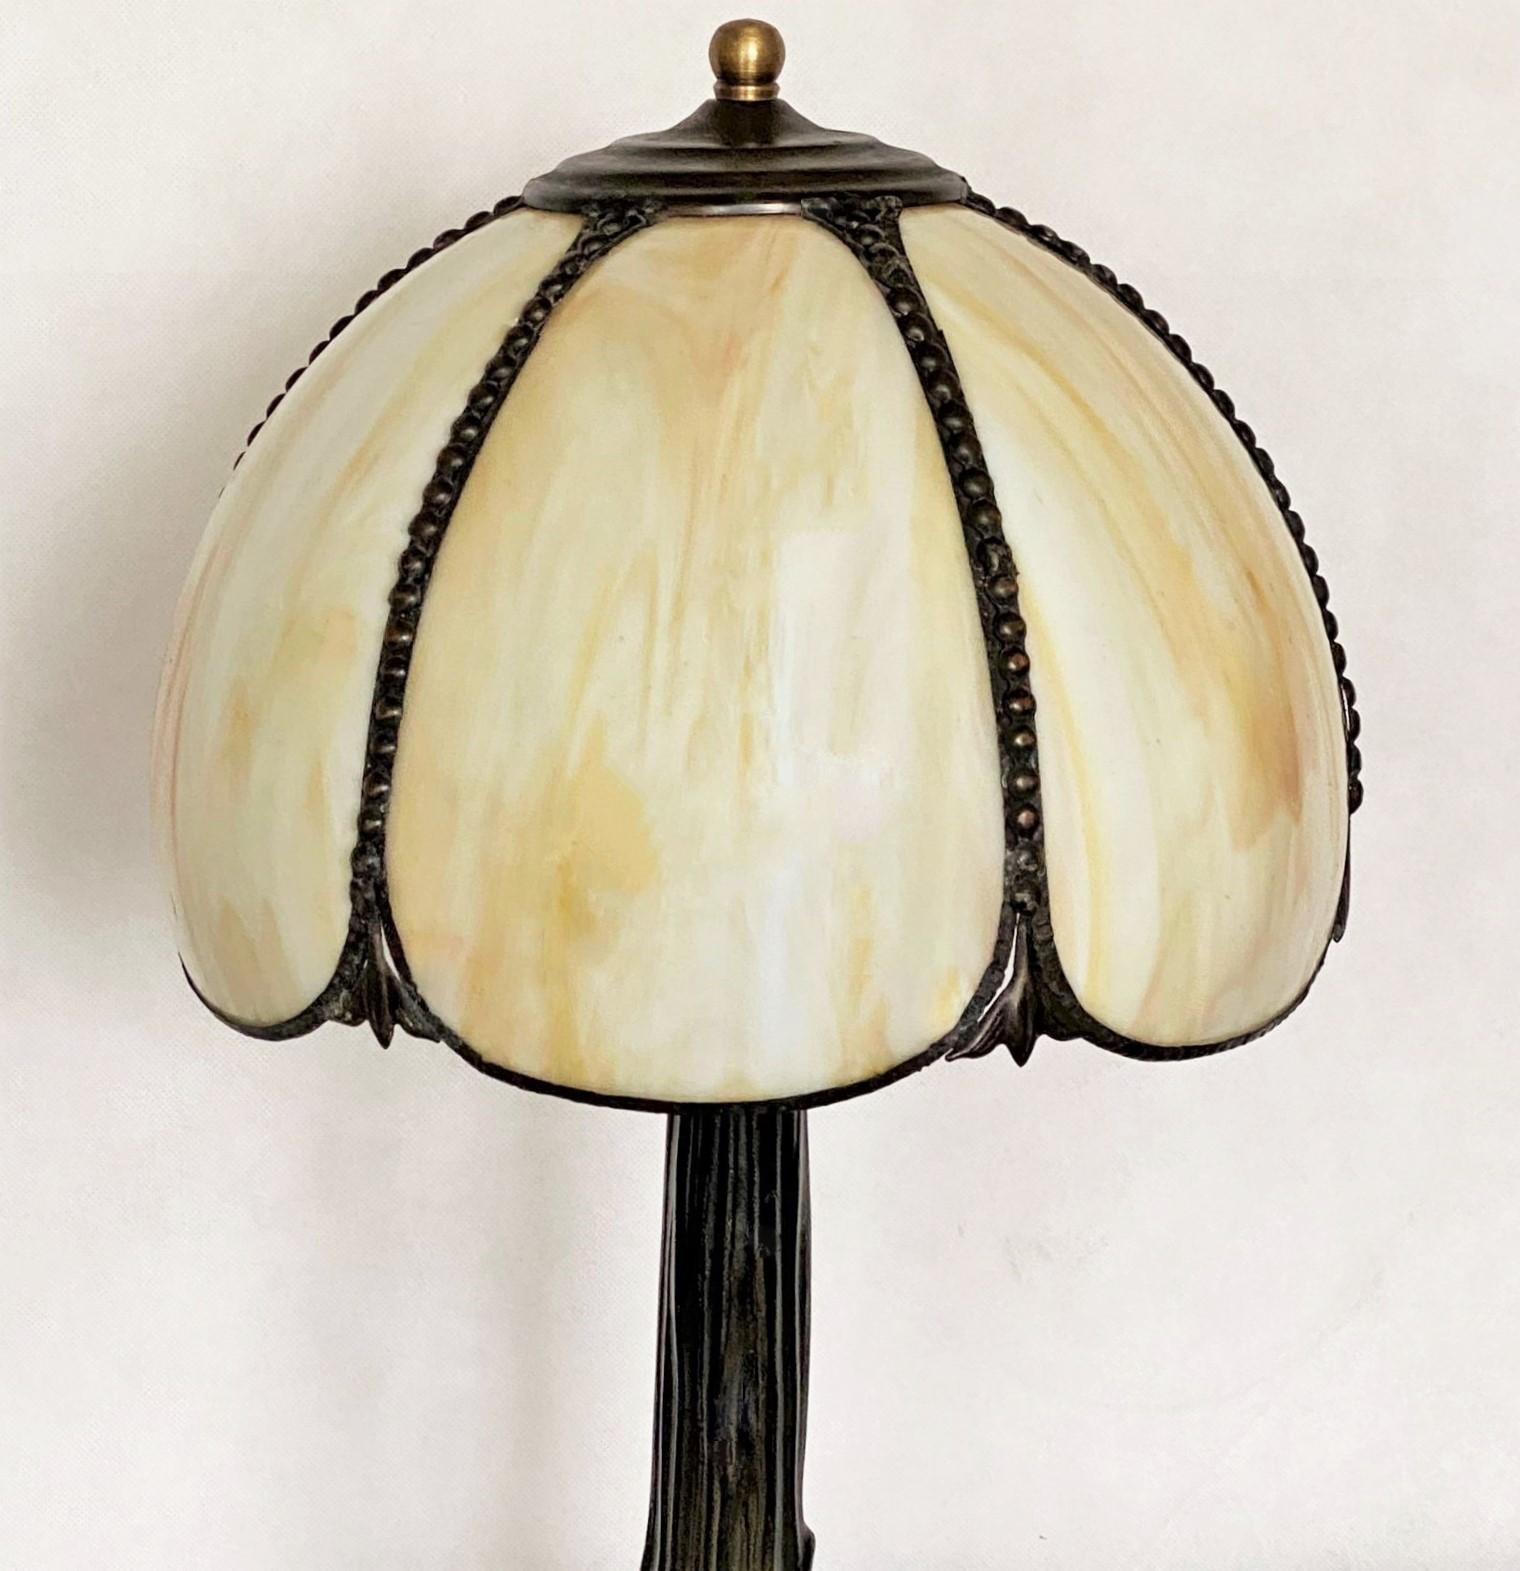 French Art Deco Table Lamp with Bent Slag Glass Shade, France, 1930-1939